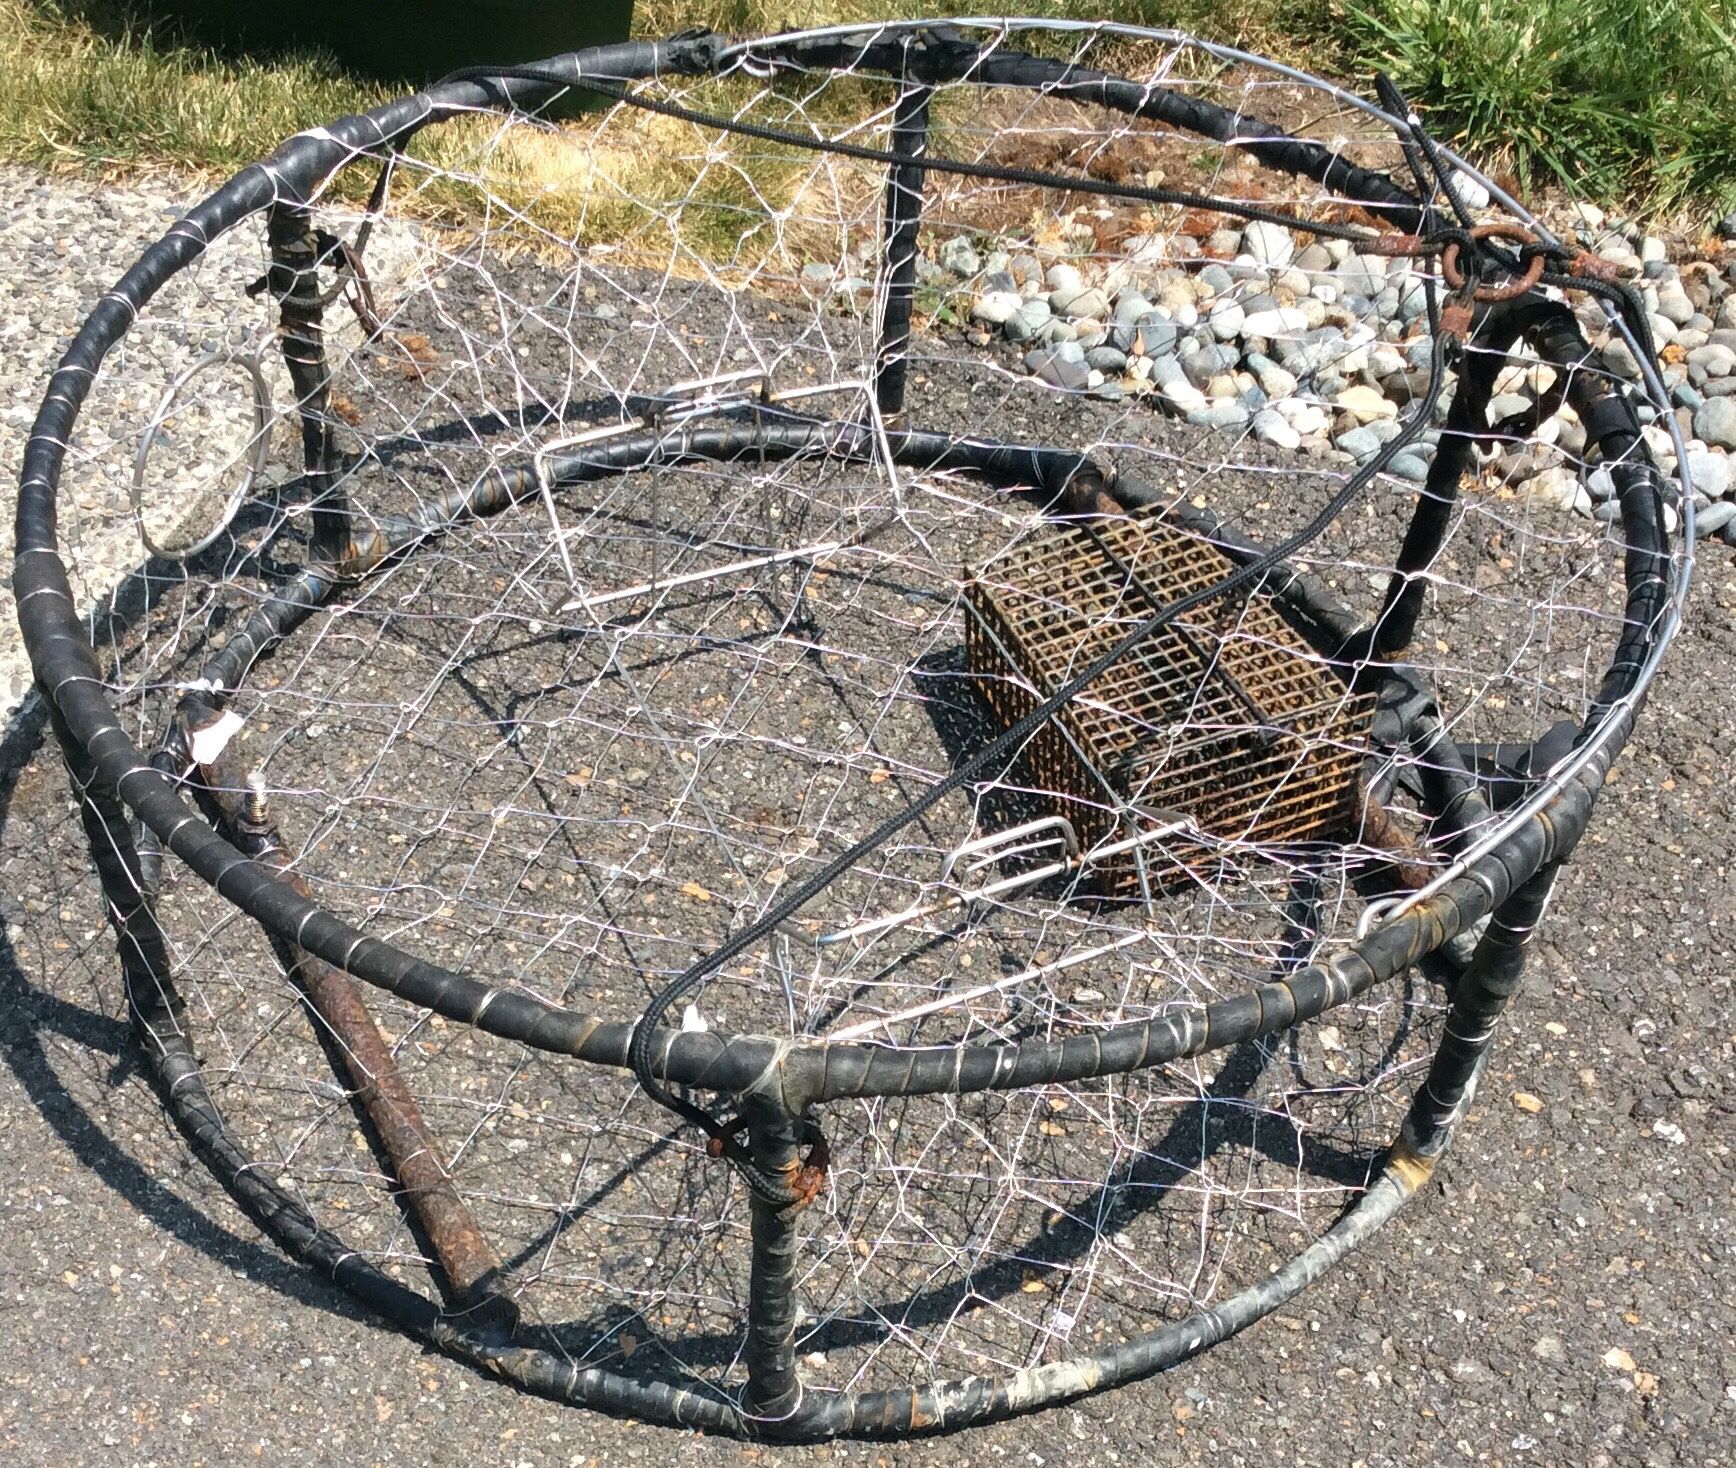 Used commercial crab pot heavy duty trap for Sale in Snohomish, WA - OfferUp